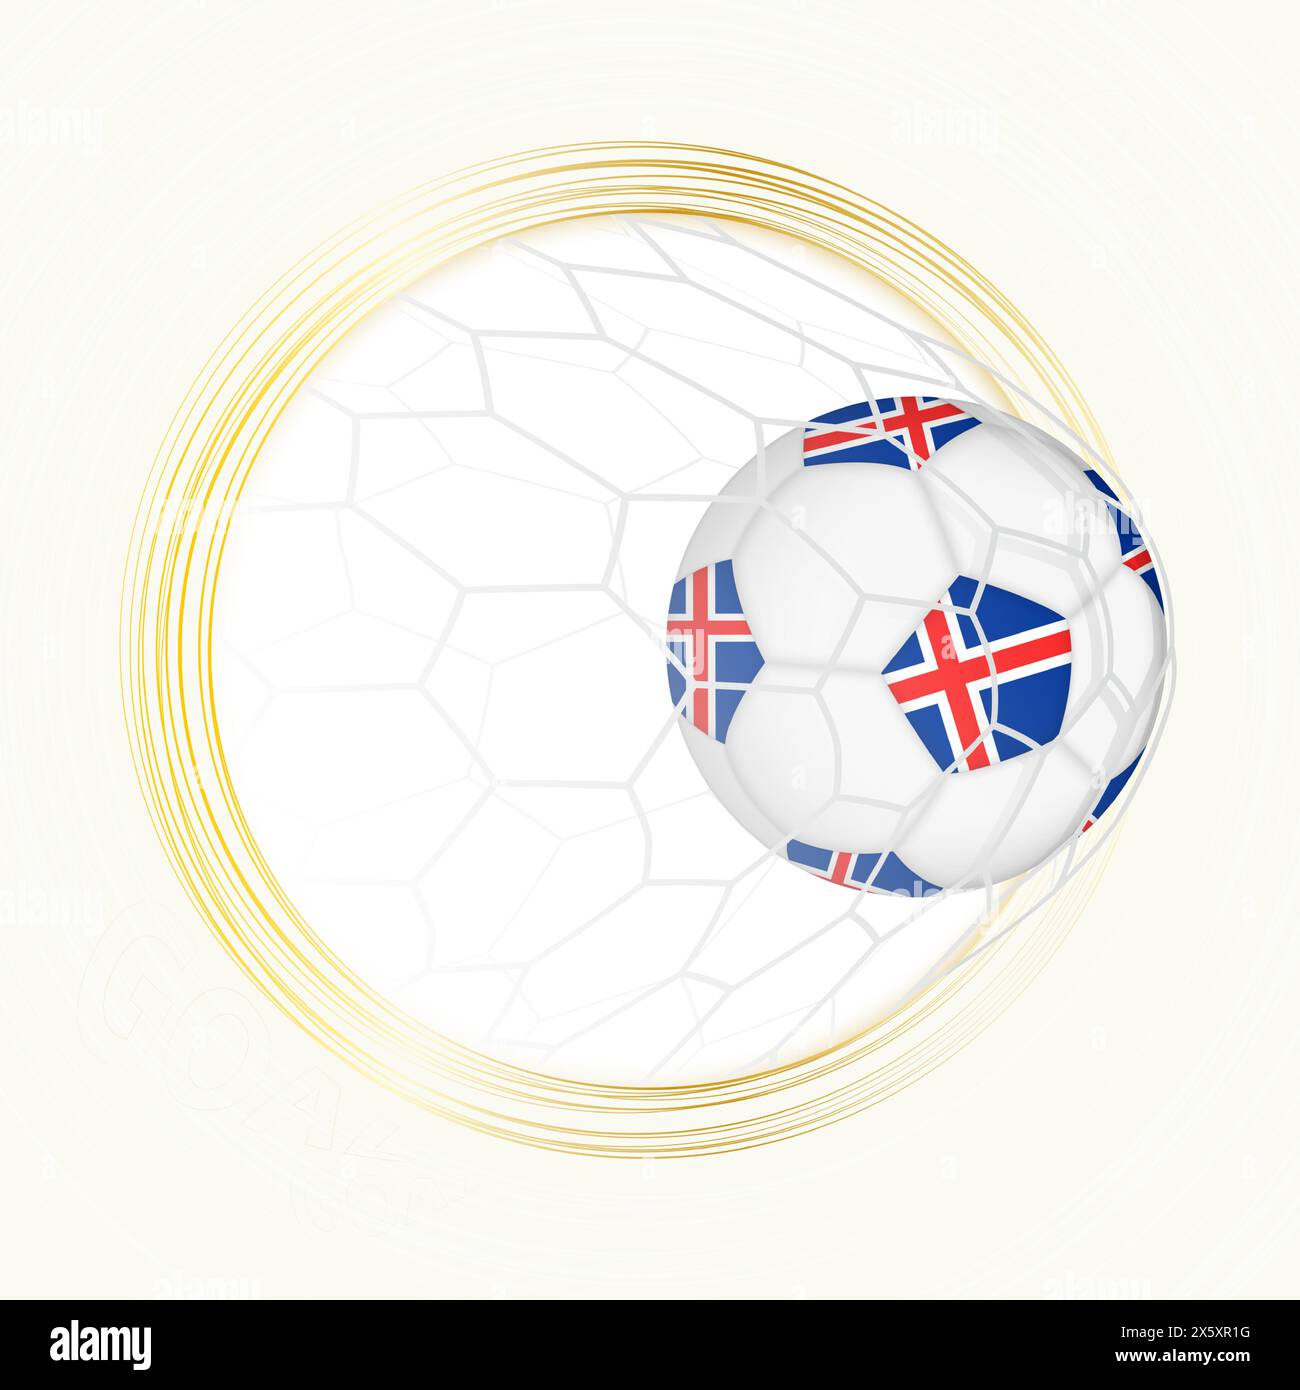 Football emblem with football ball with flag of Iceland in net, scoring goal for Iceland. Vector emblem. Stock Vector